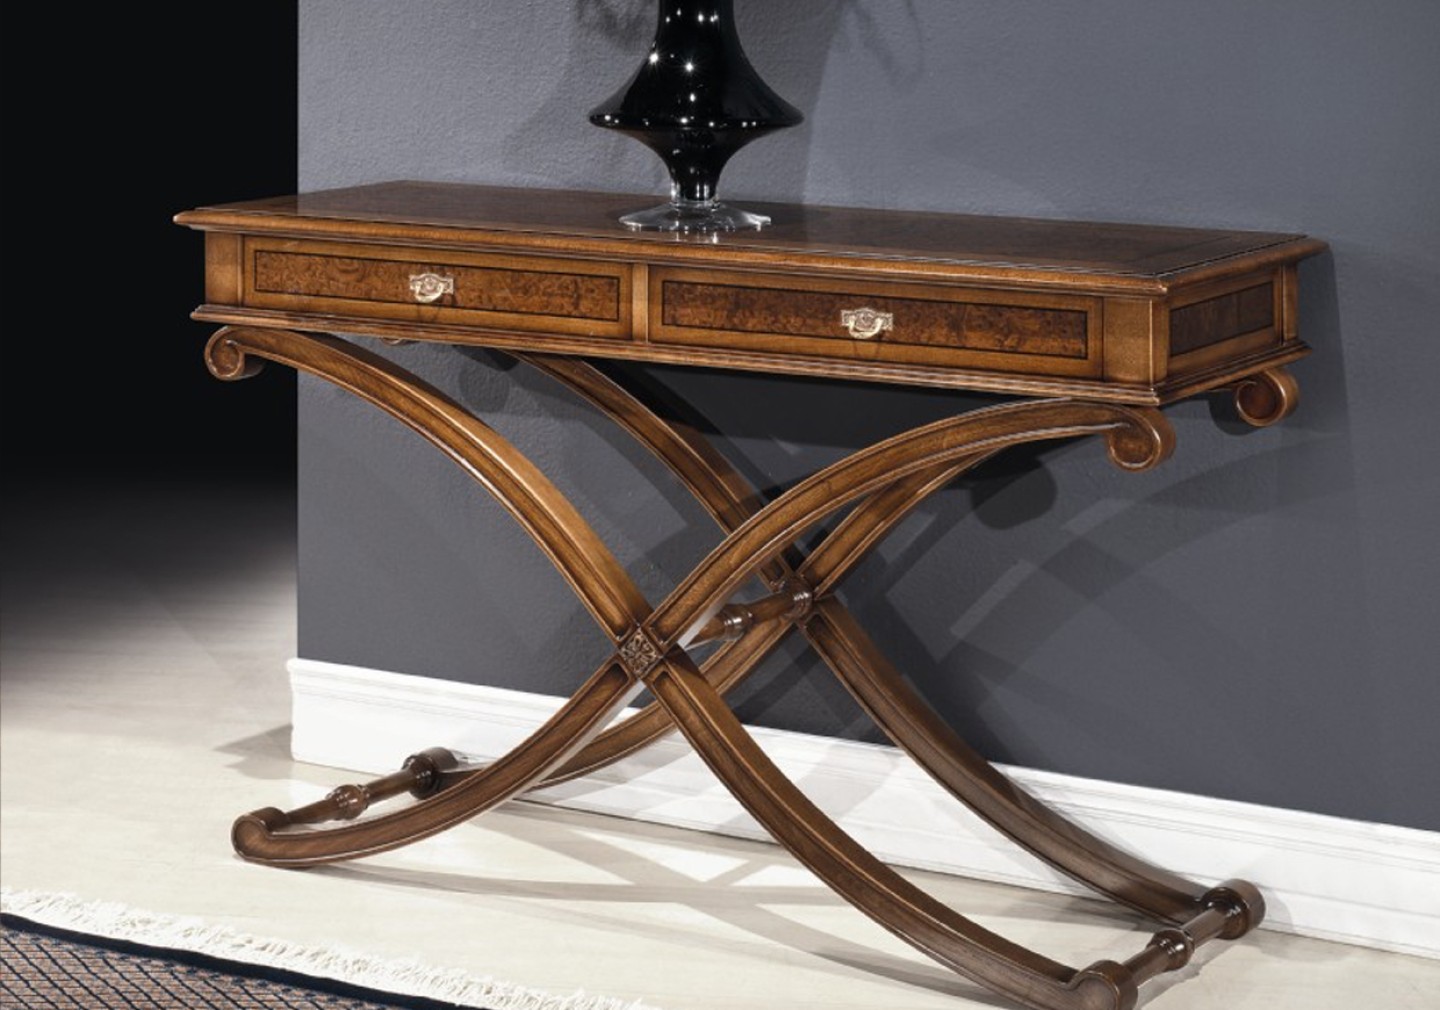 THE IONA CLASSIC CONSOLE TABLE